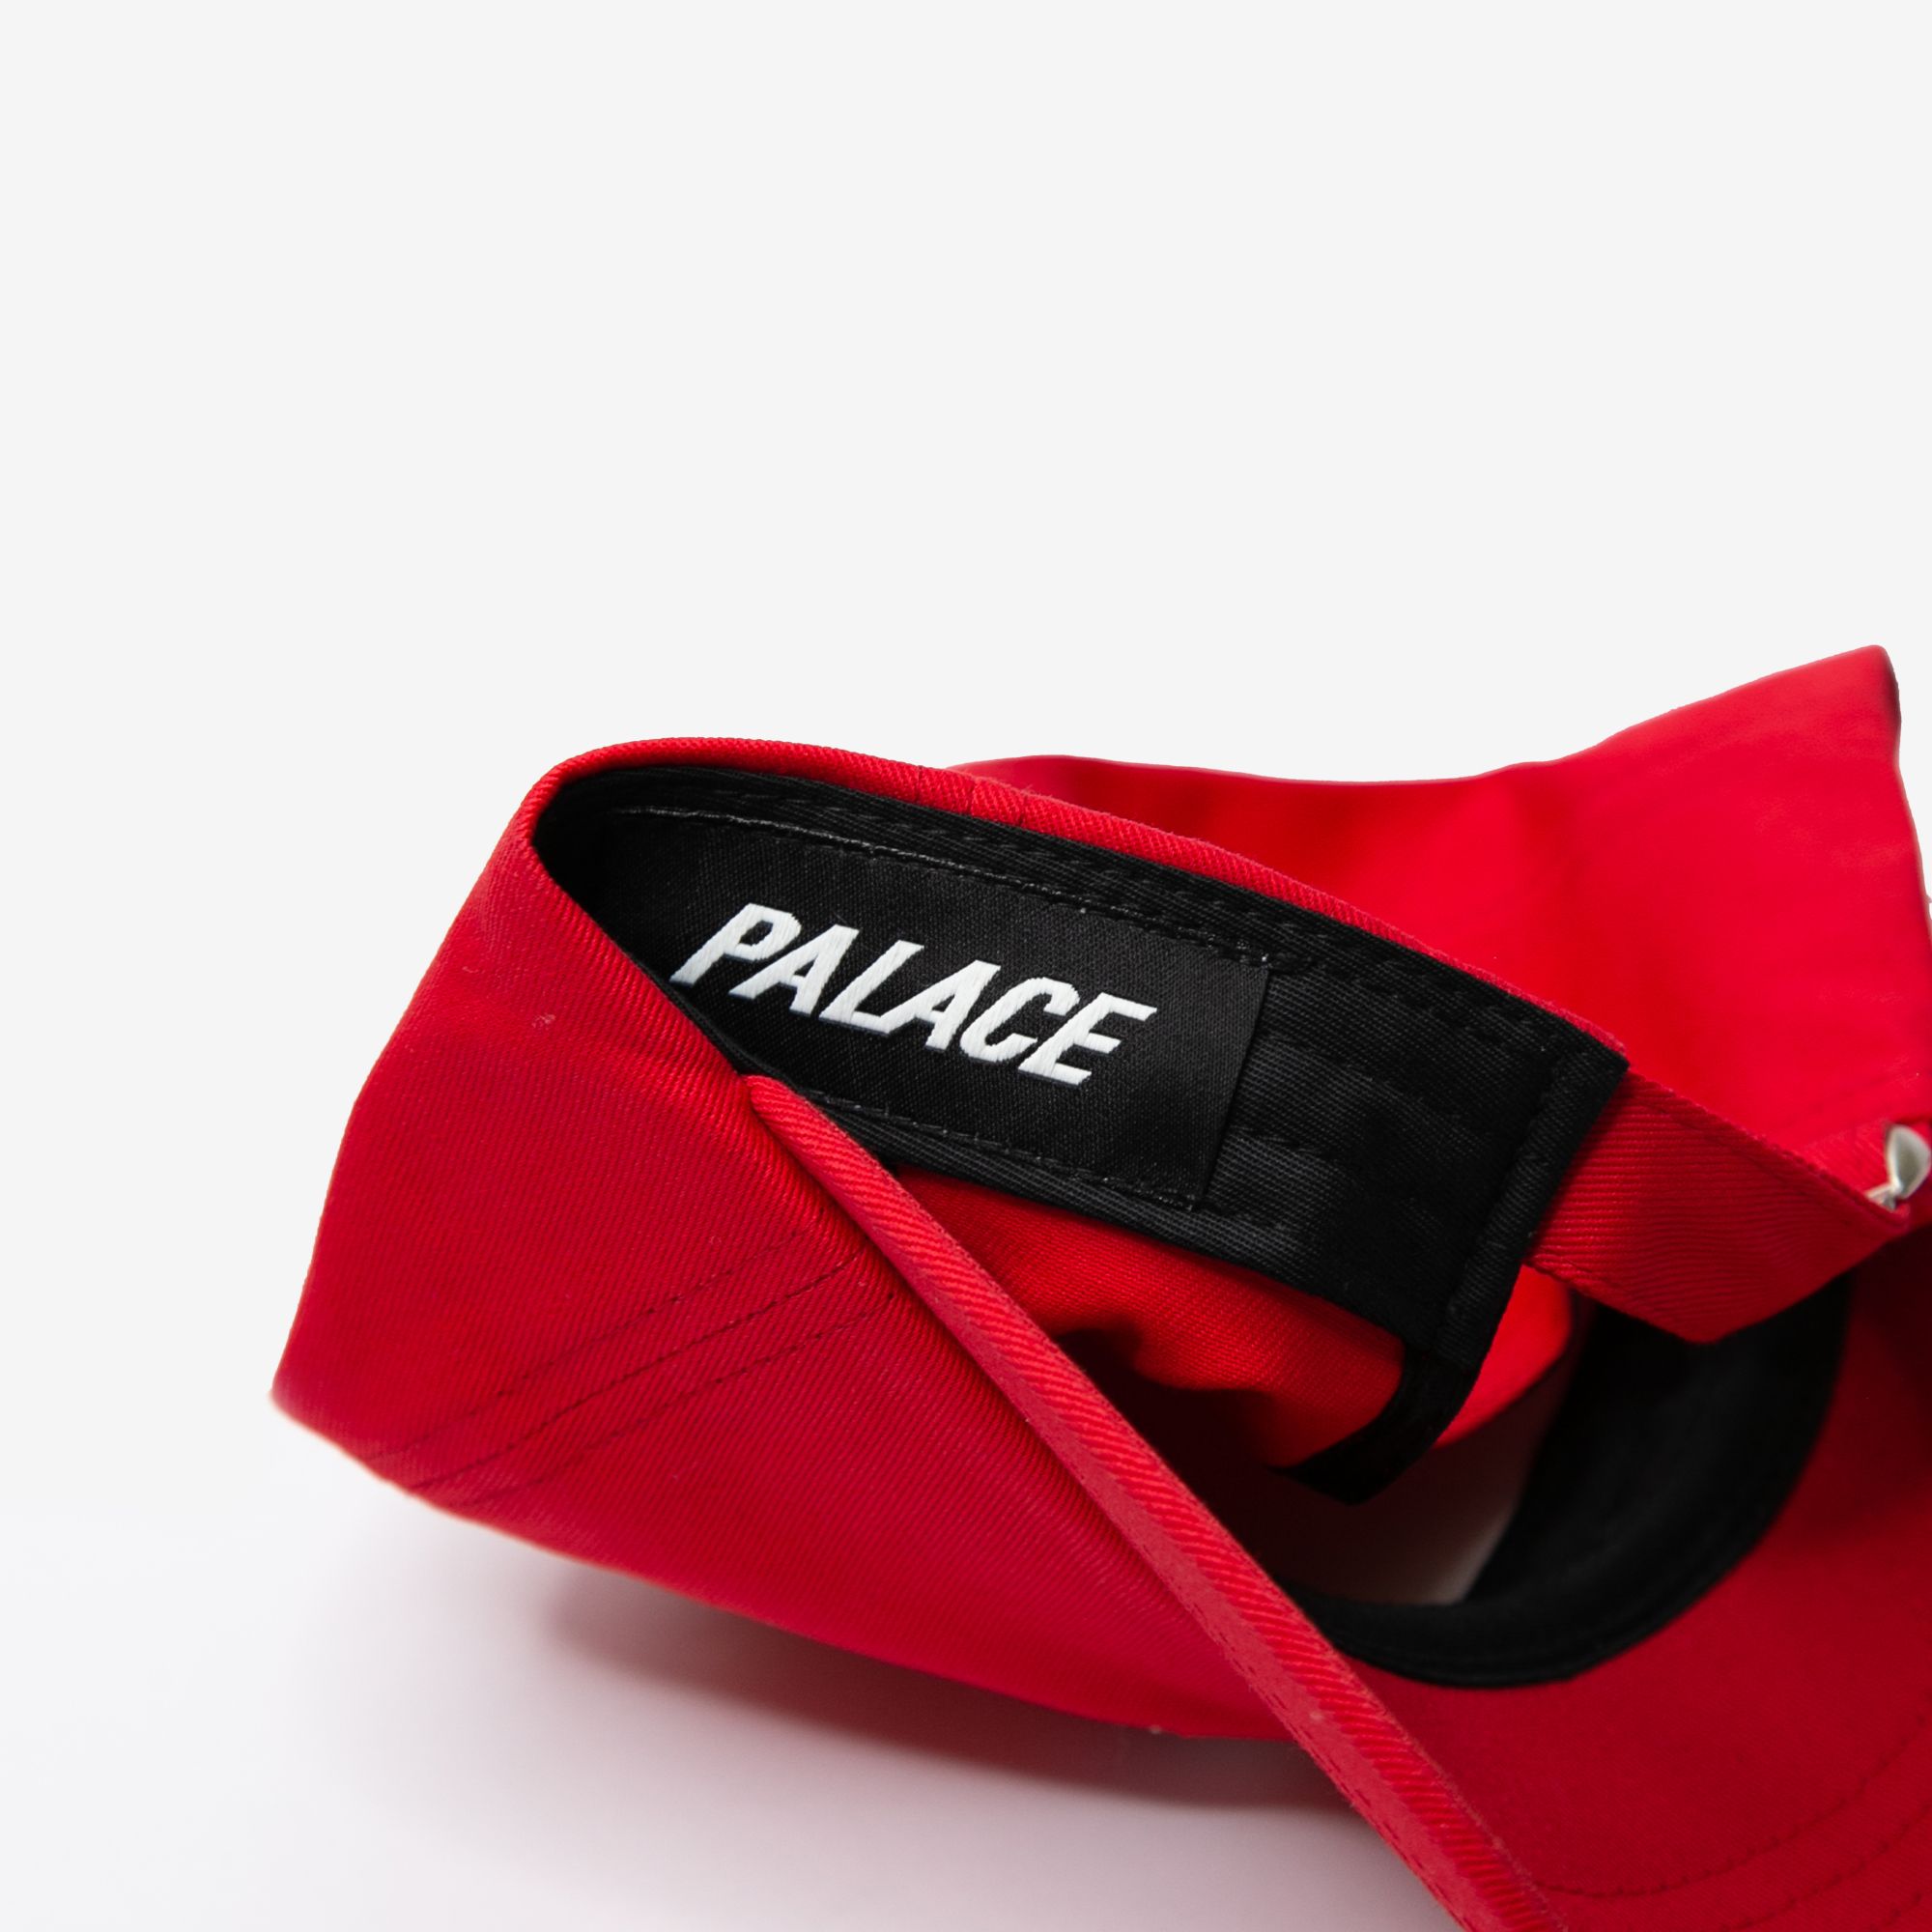  Palace Basically A Split 6-Panel Hat - Red 